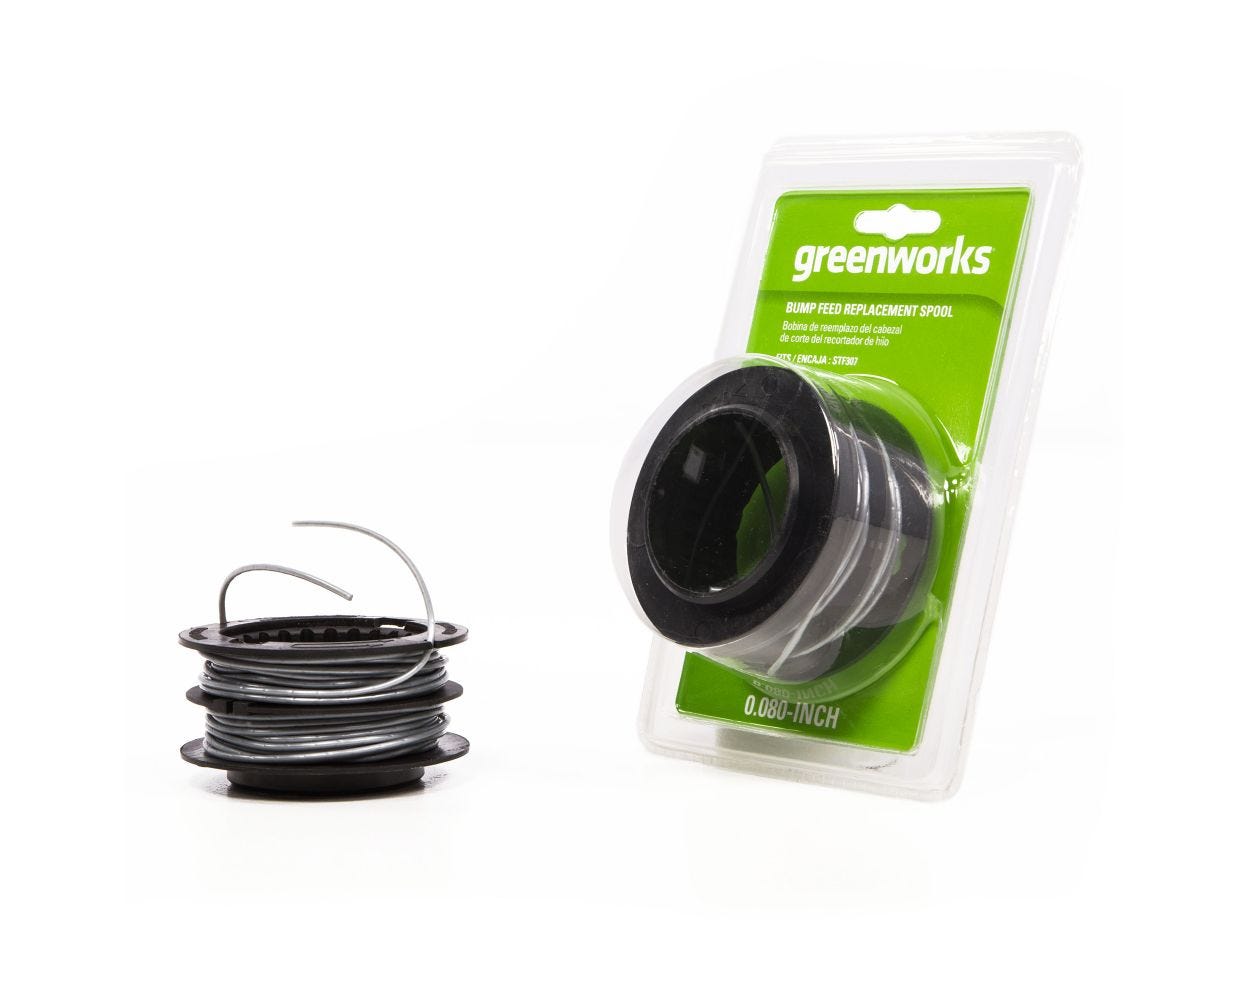 Trimmer spool products